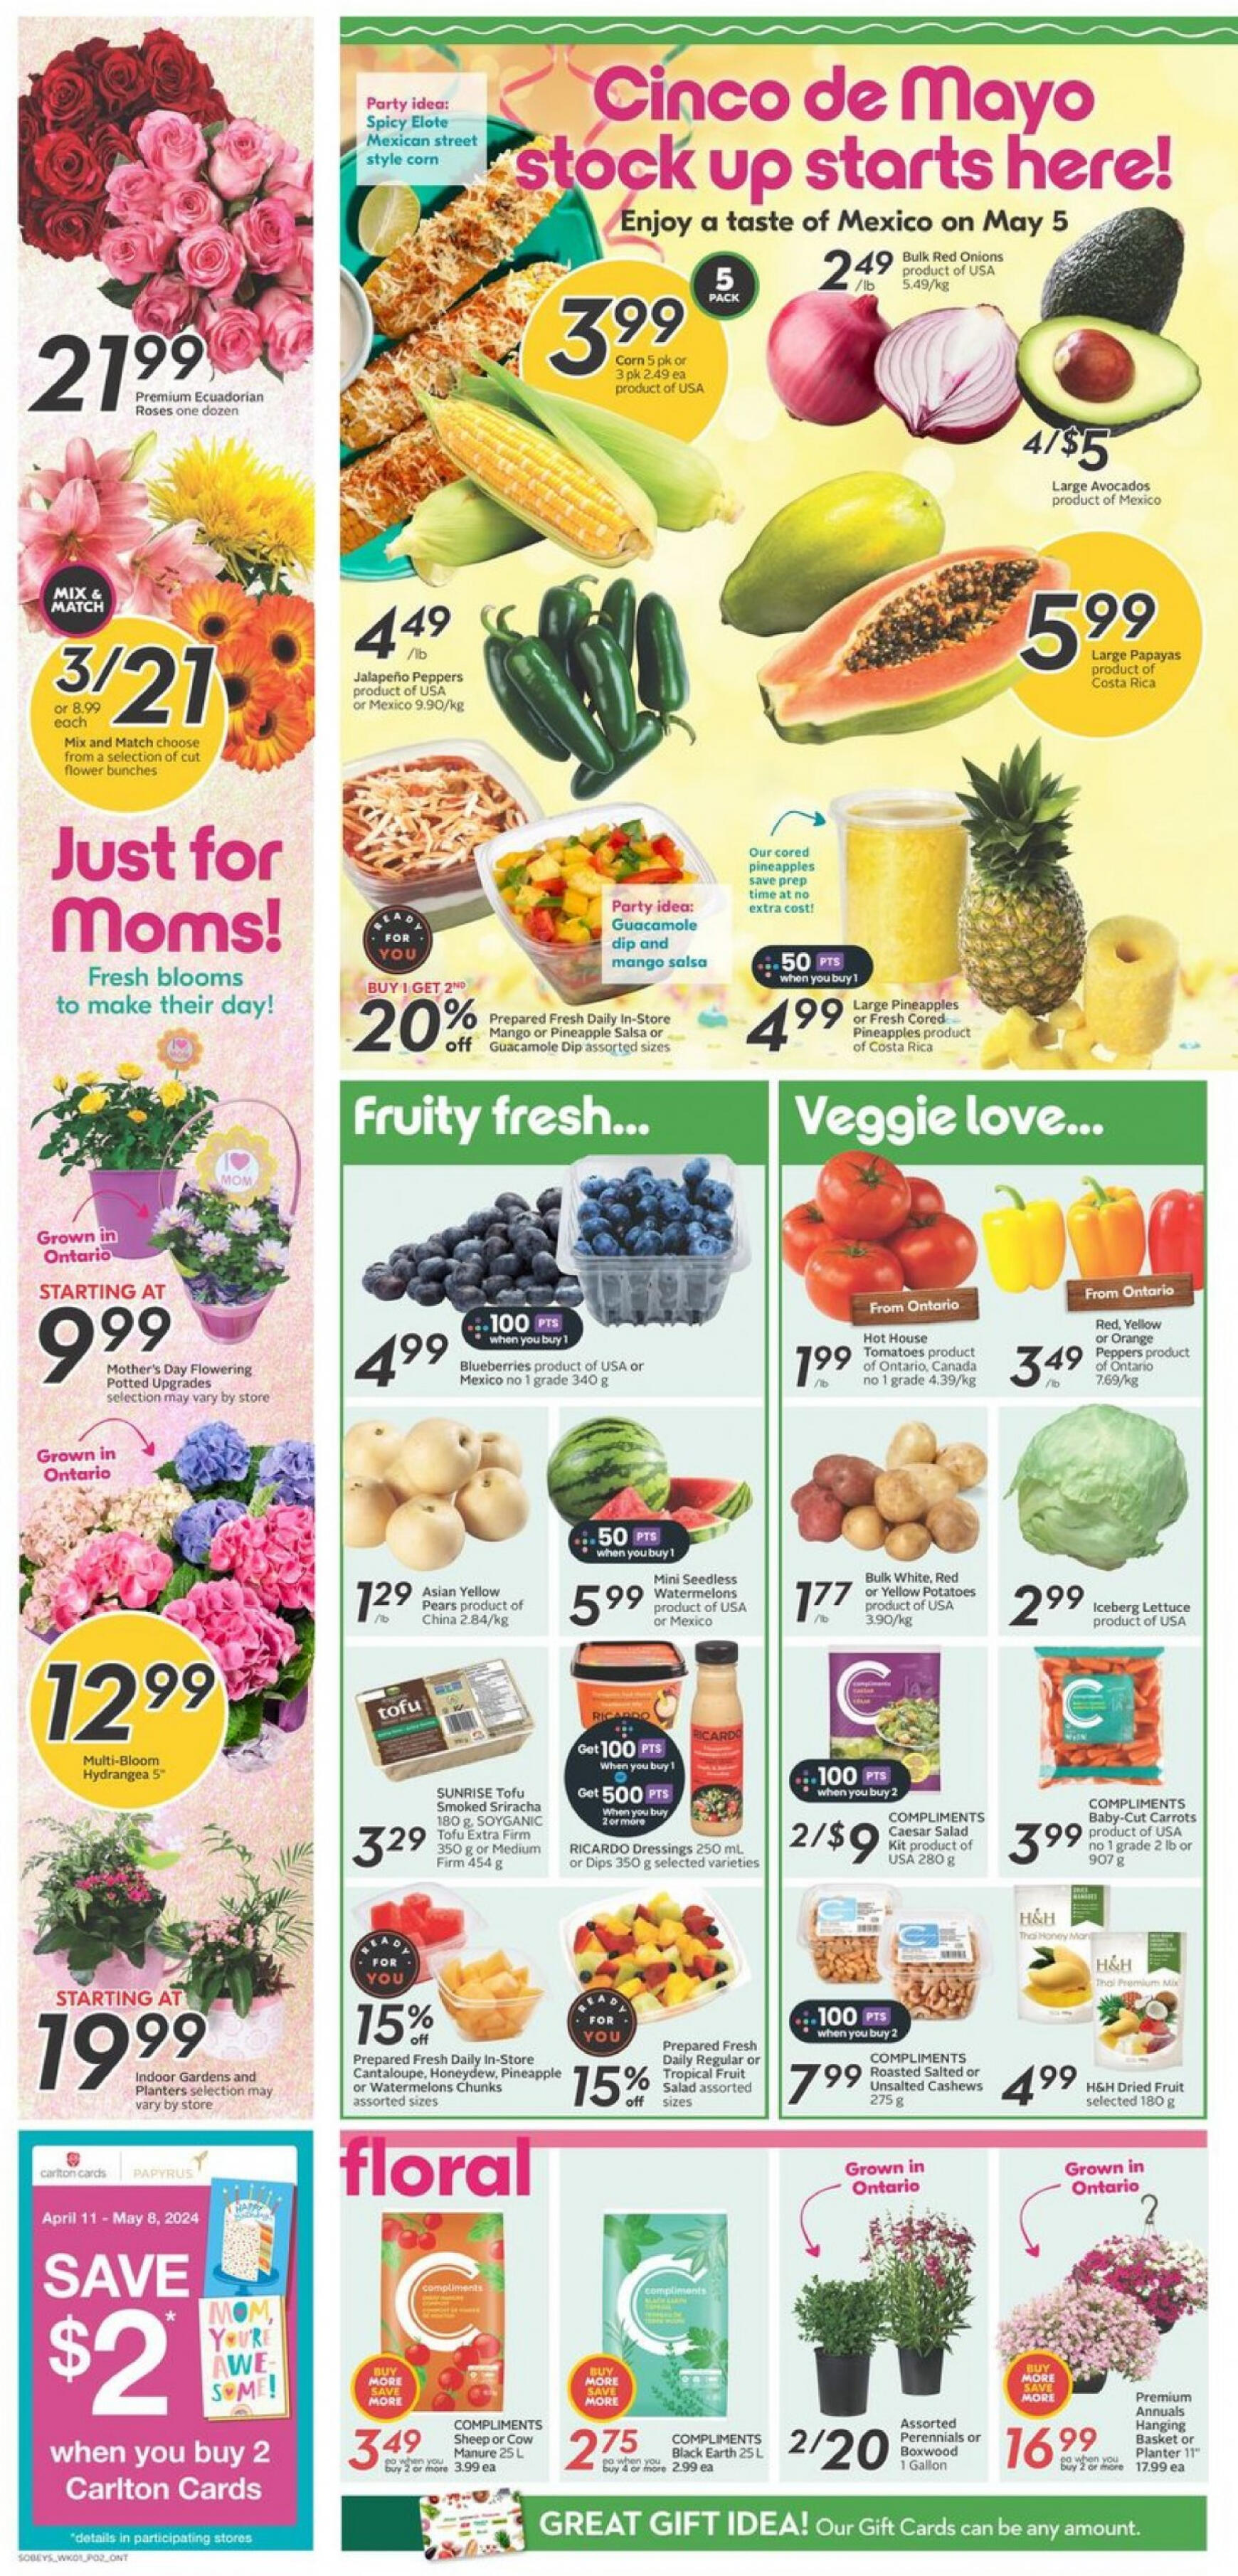 sobeys - Sobeys - Weekly Flyer - Ontario flyer current 02.05. - 08.05. - page: 6